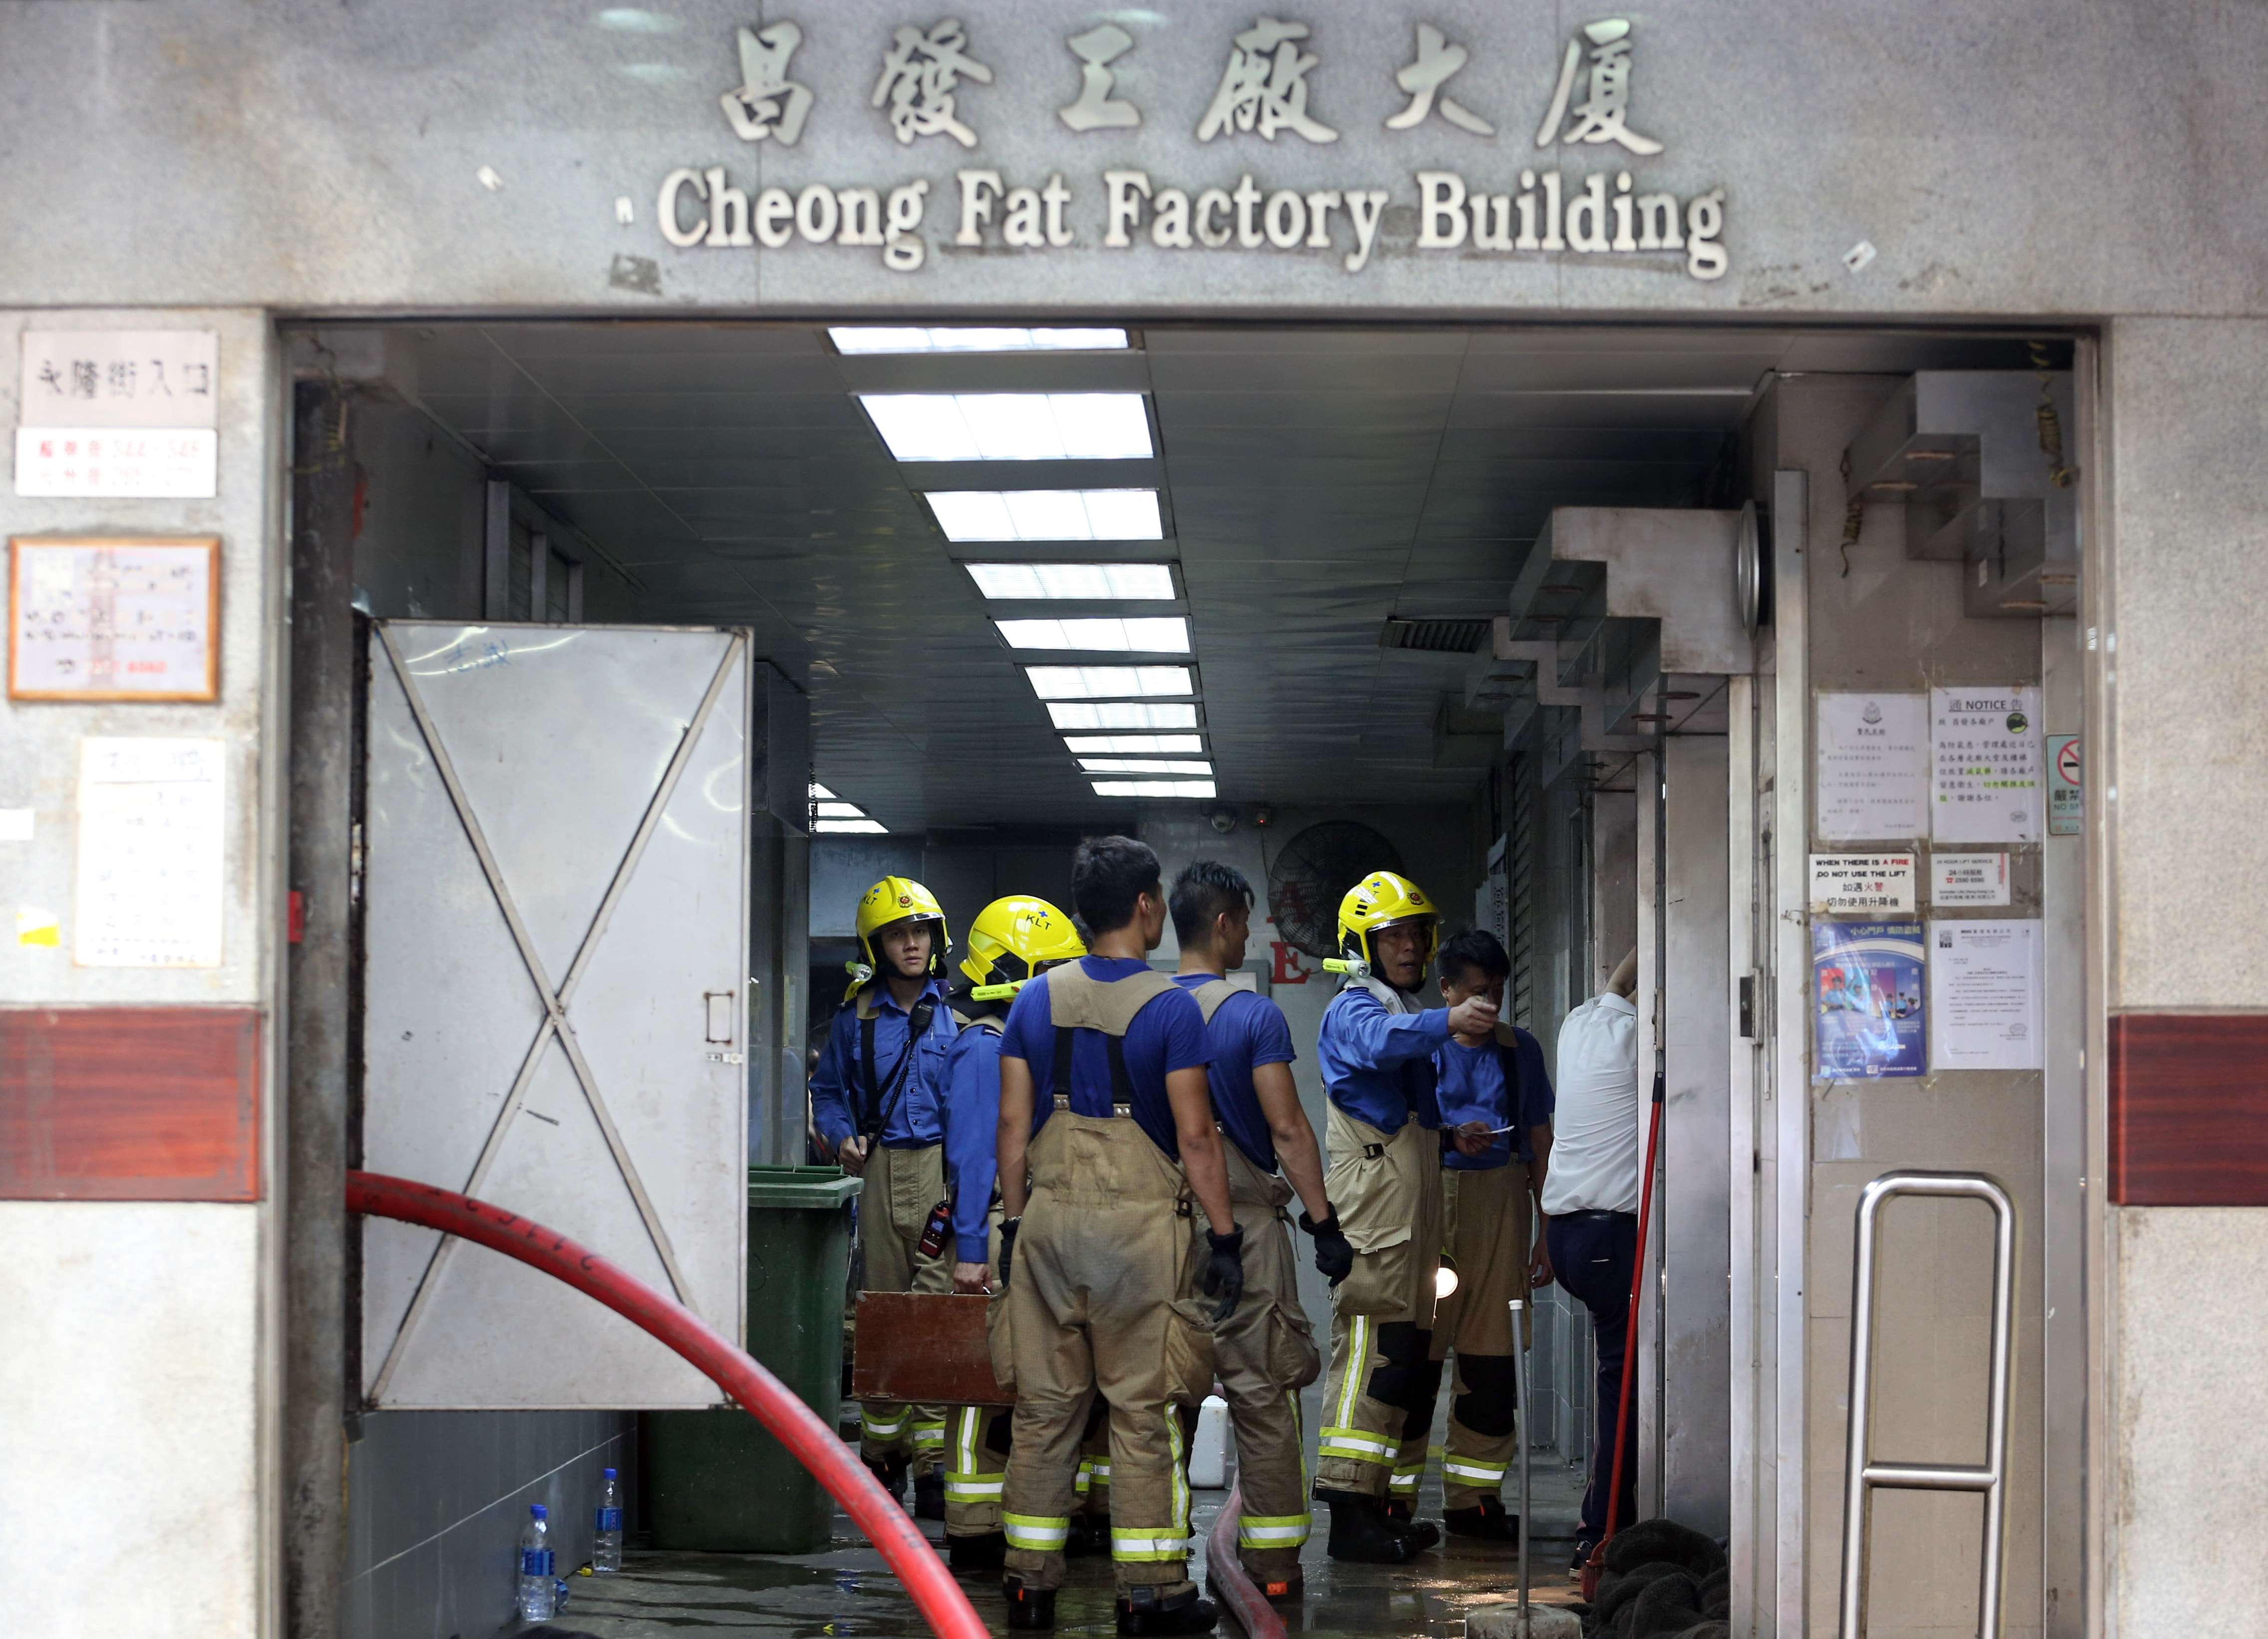 The third-alarm fire broke out at Cheong Fat Factory Building in July. Photo: Felix Wong